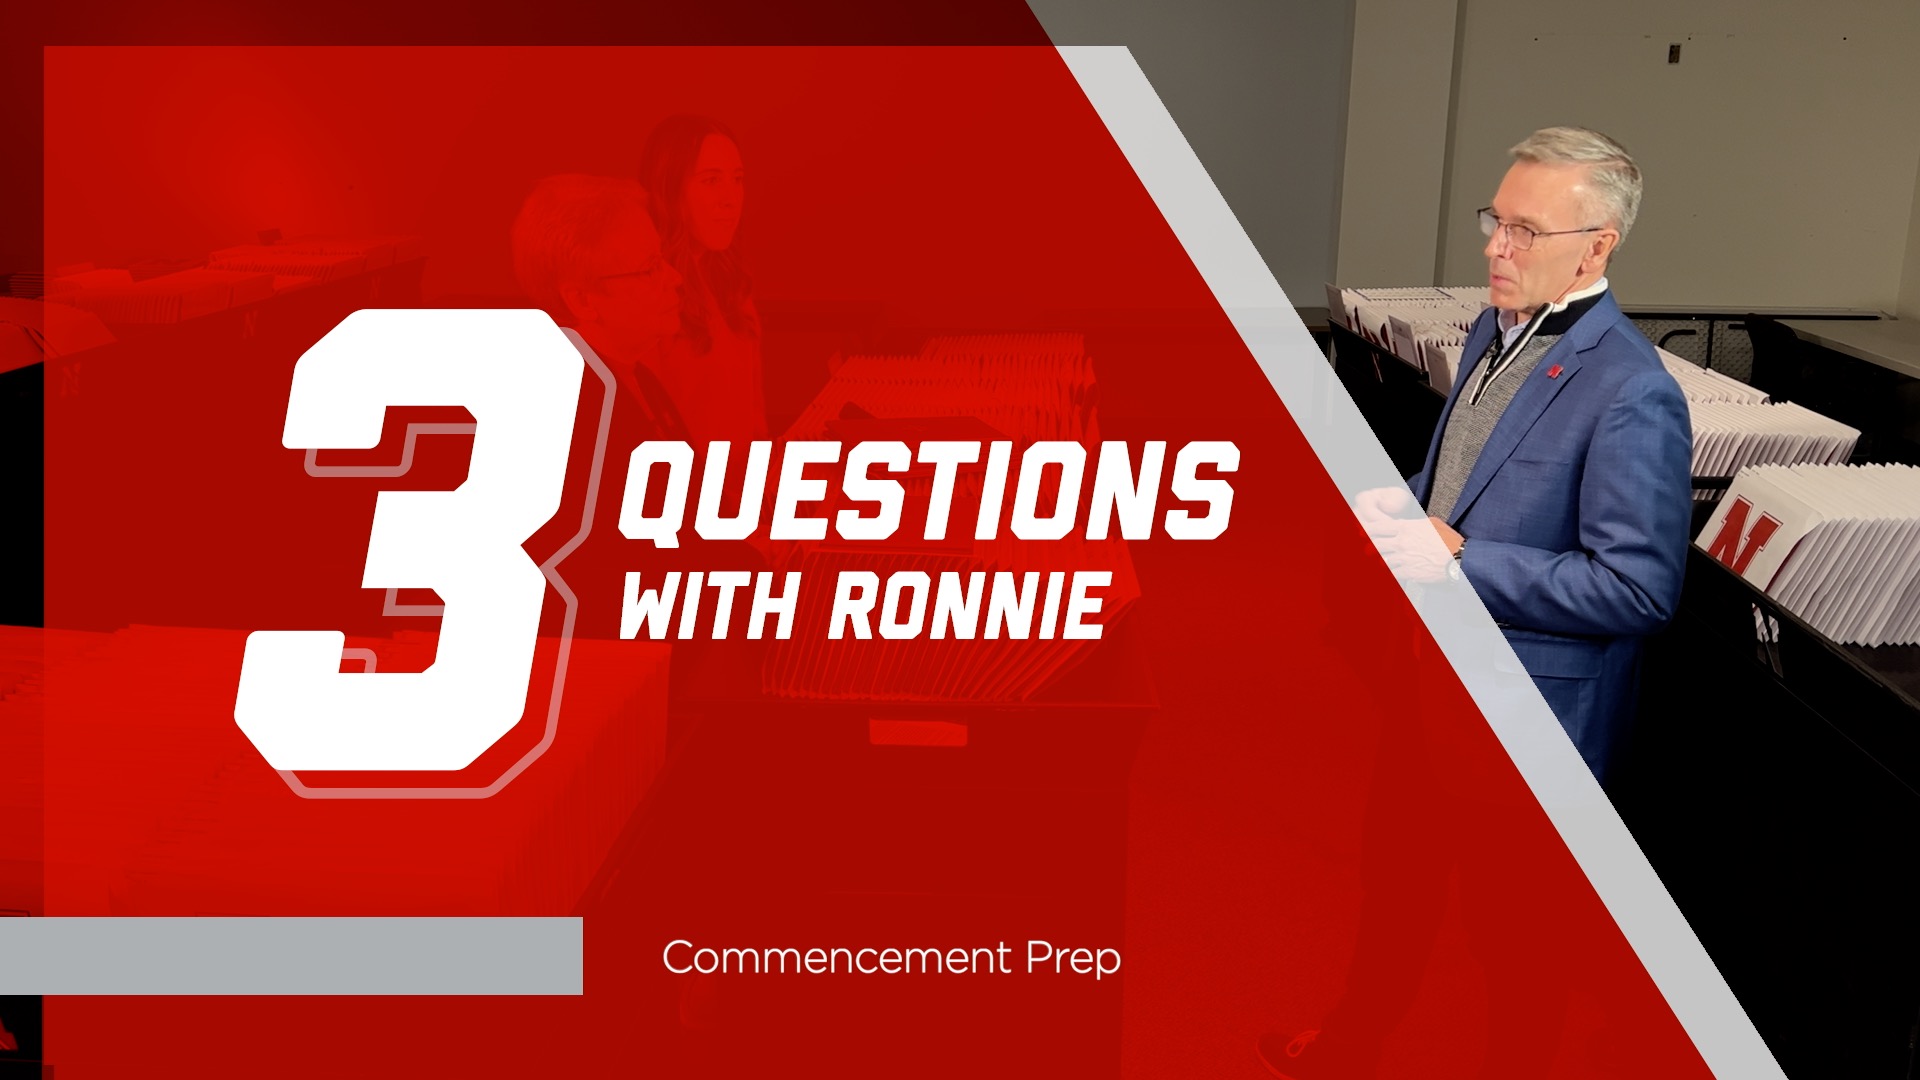 3 Questions with Ronnie | Commencement Prep